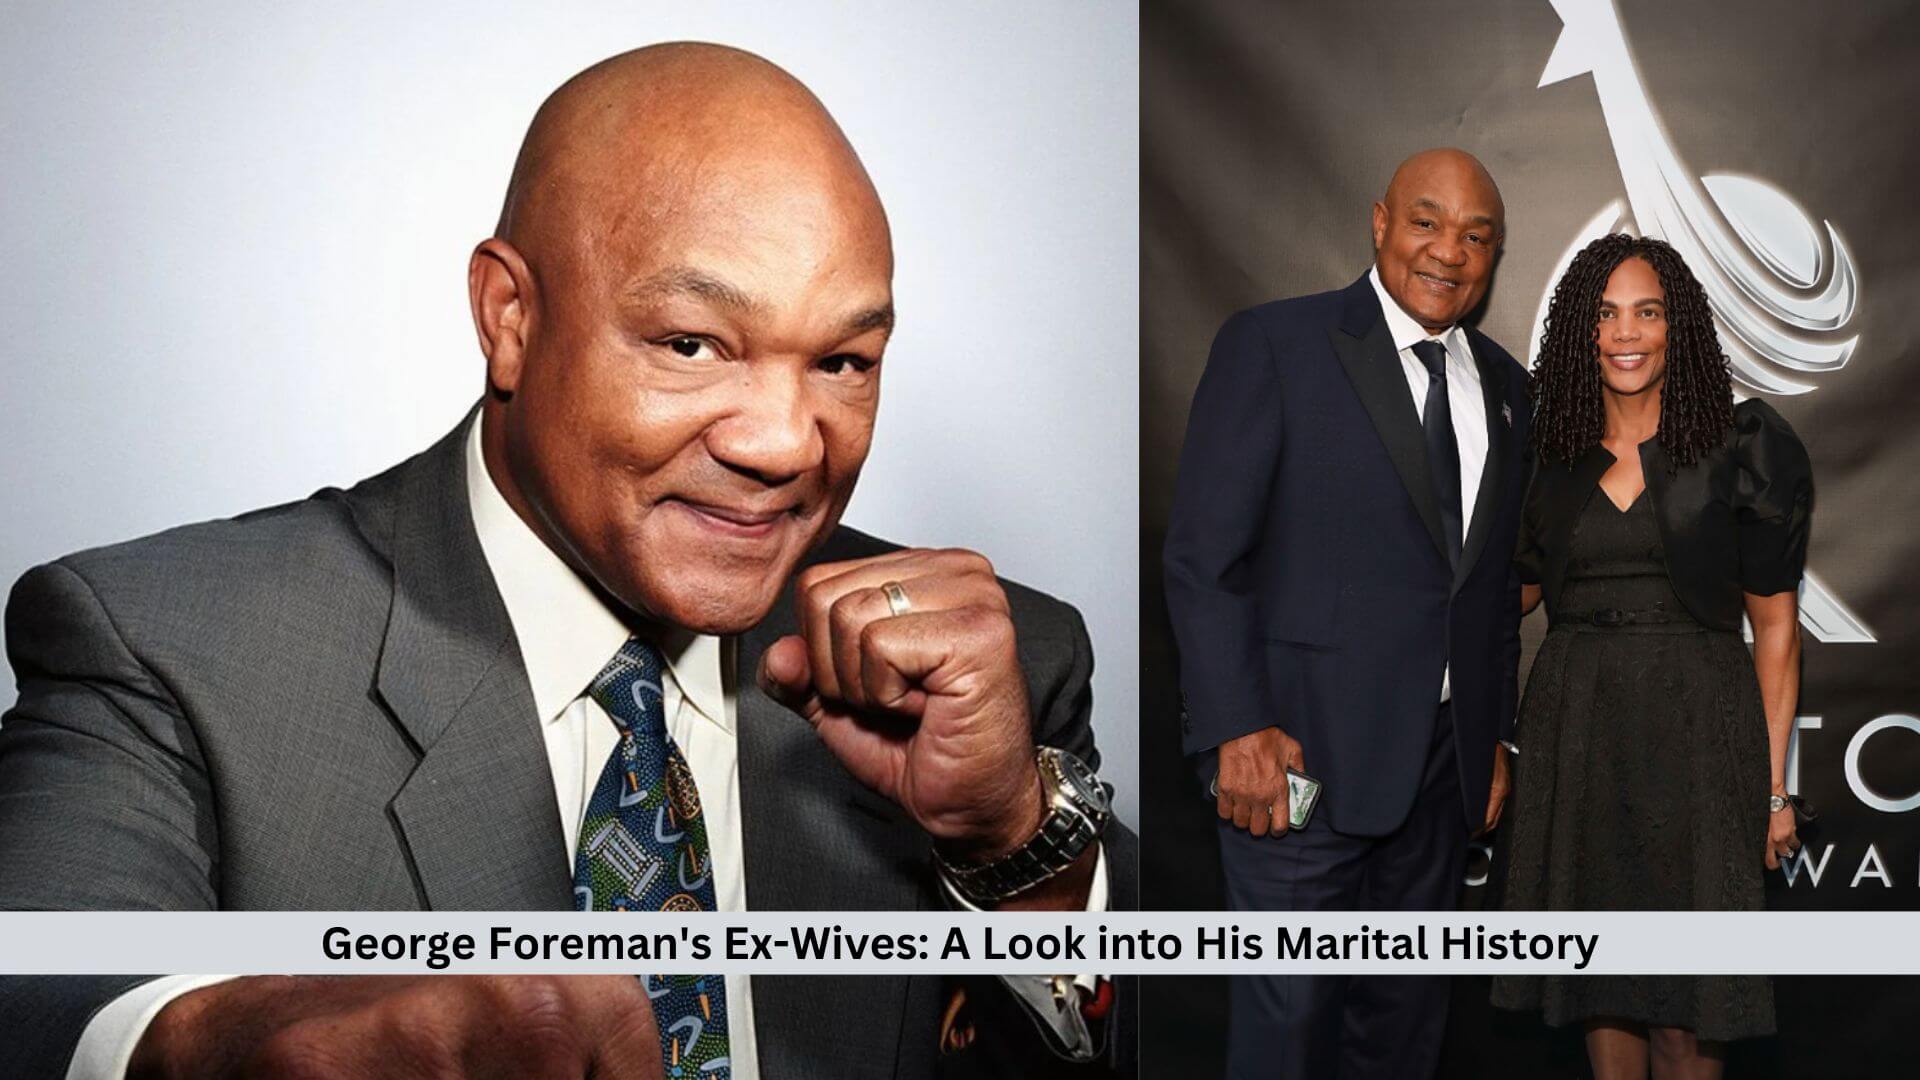 George Foreman's Ex-Wives: A Look into His Marital History